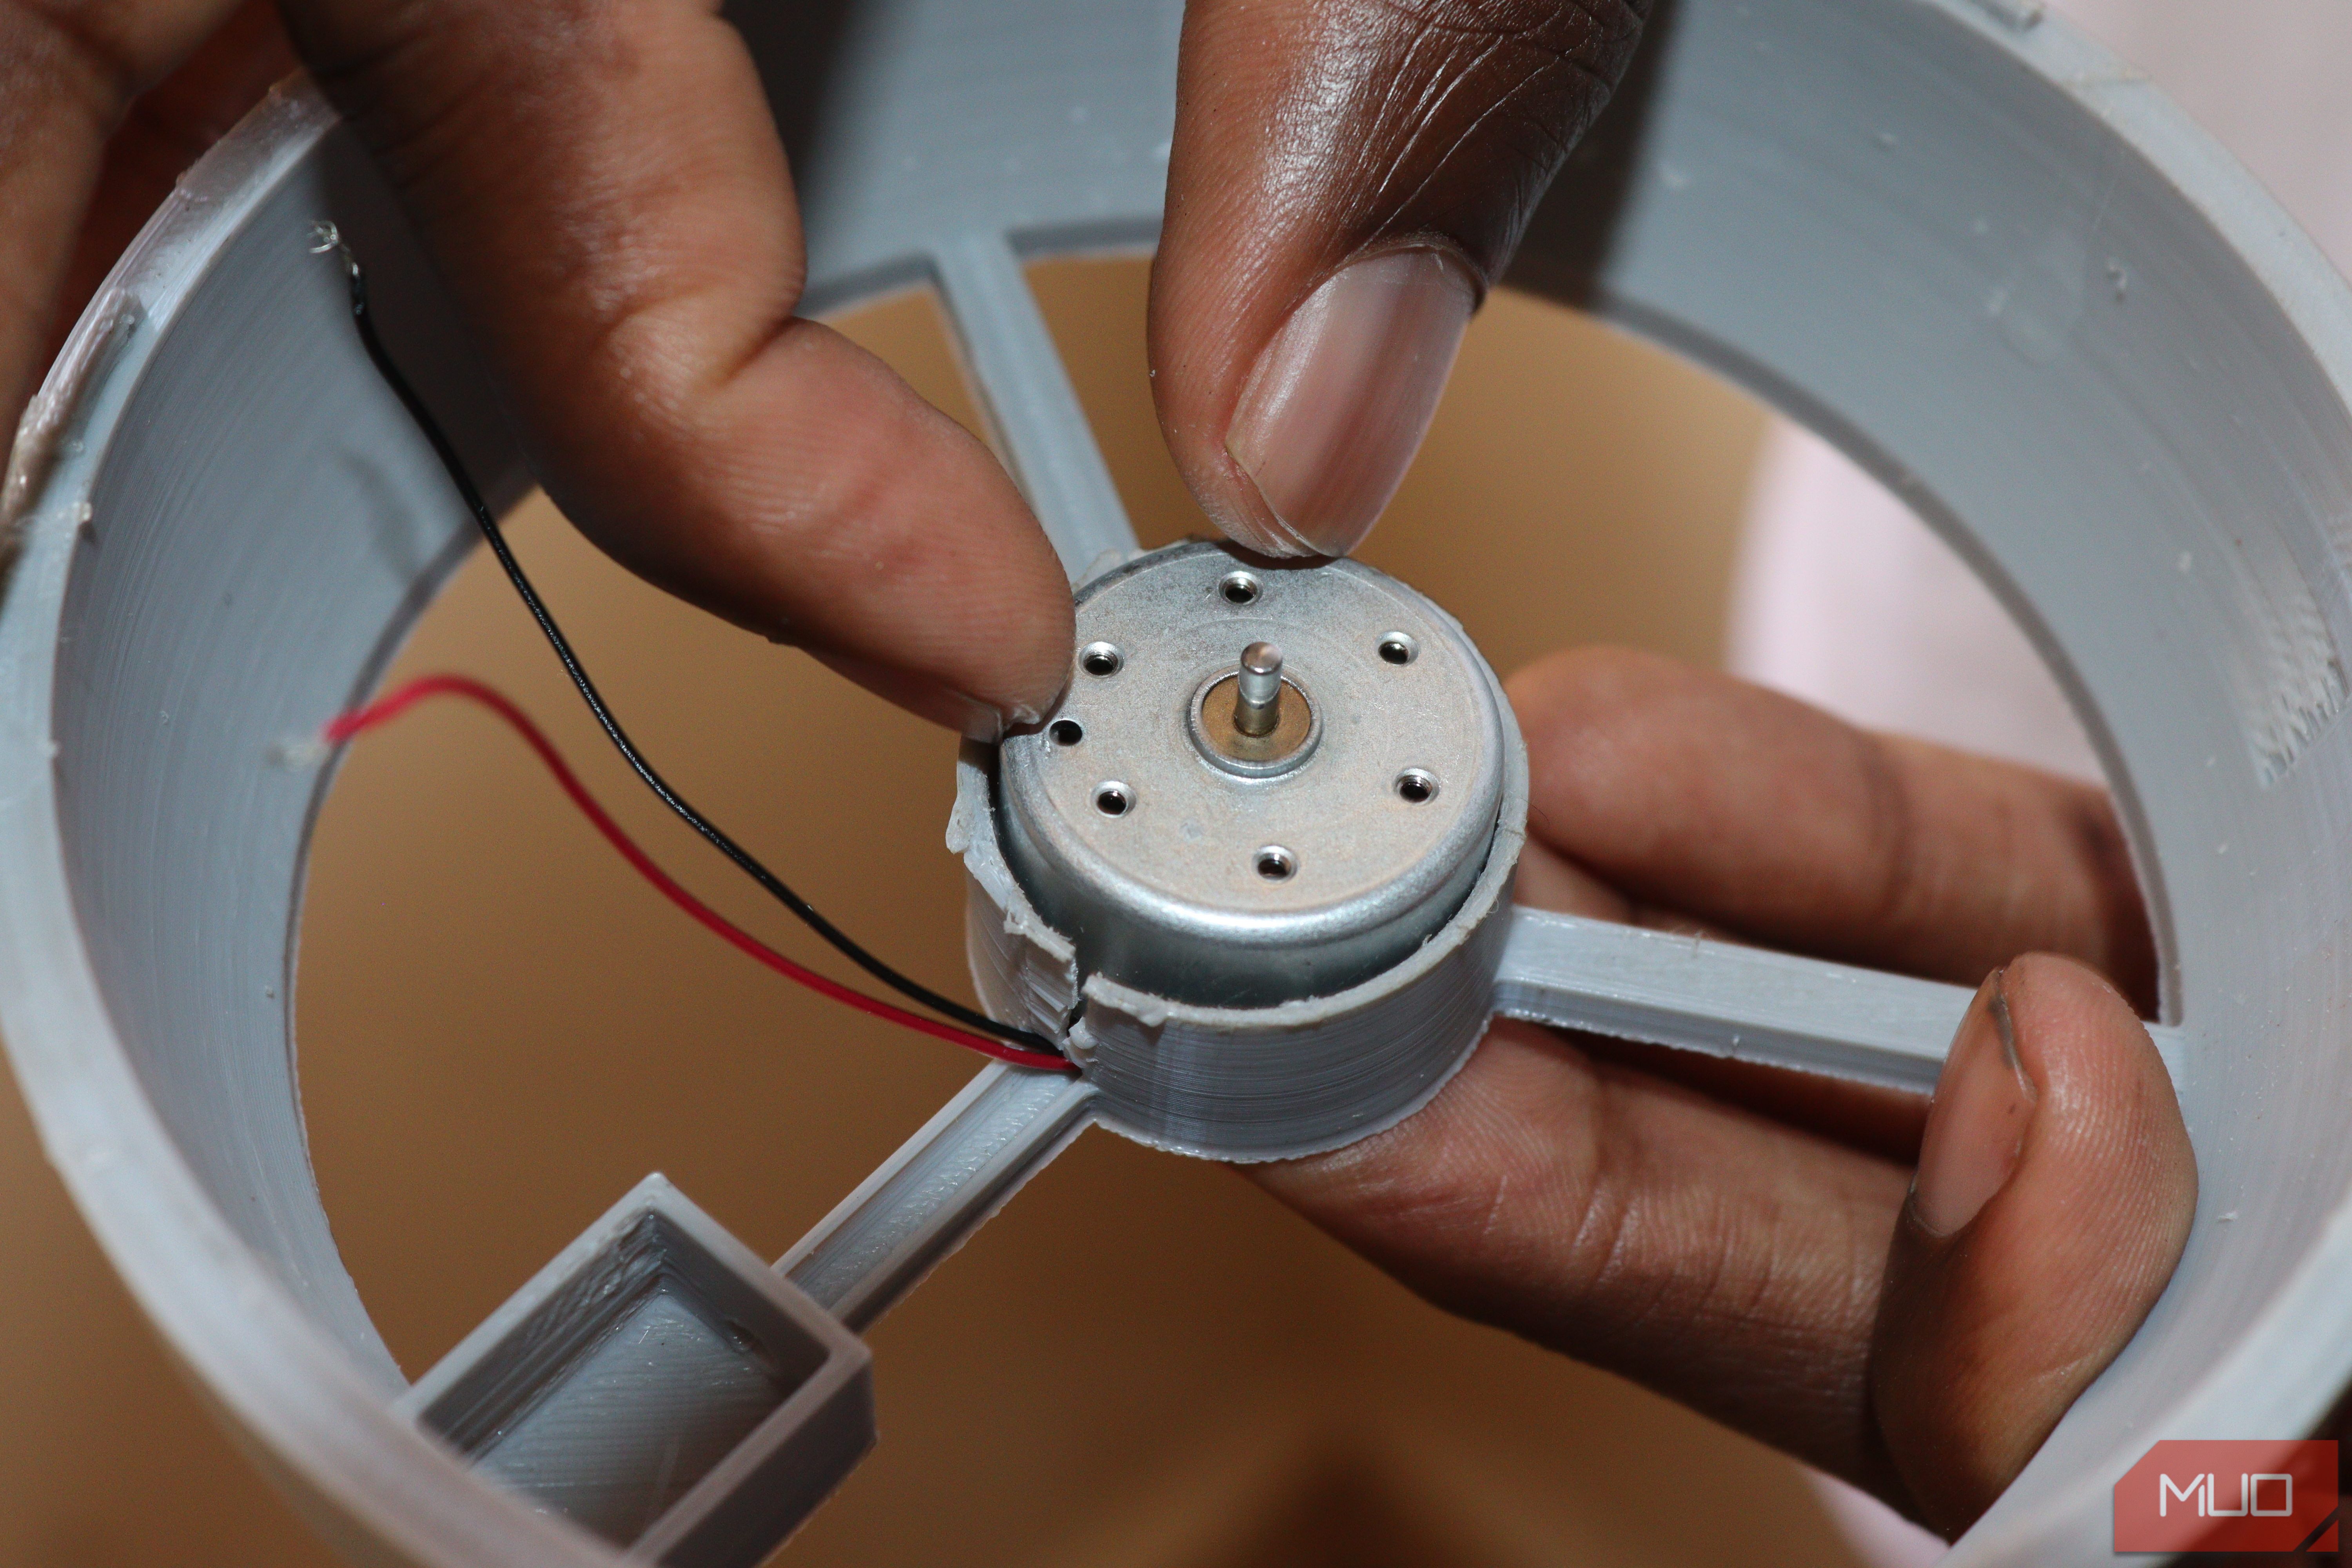 Placing the motor inside the casing of the fan